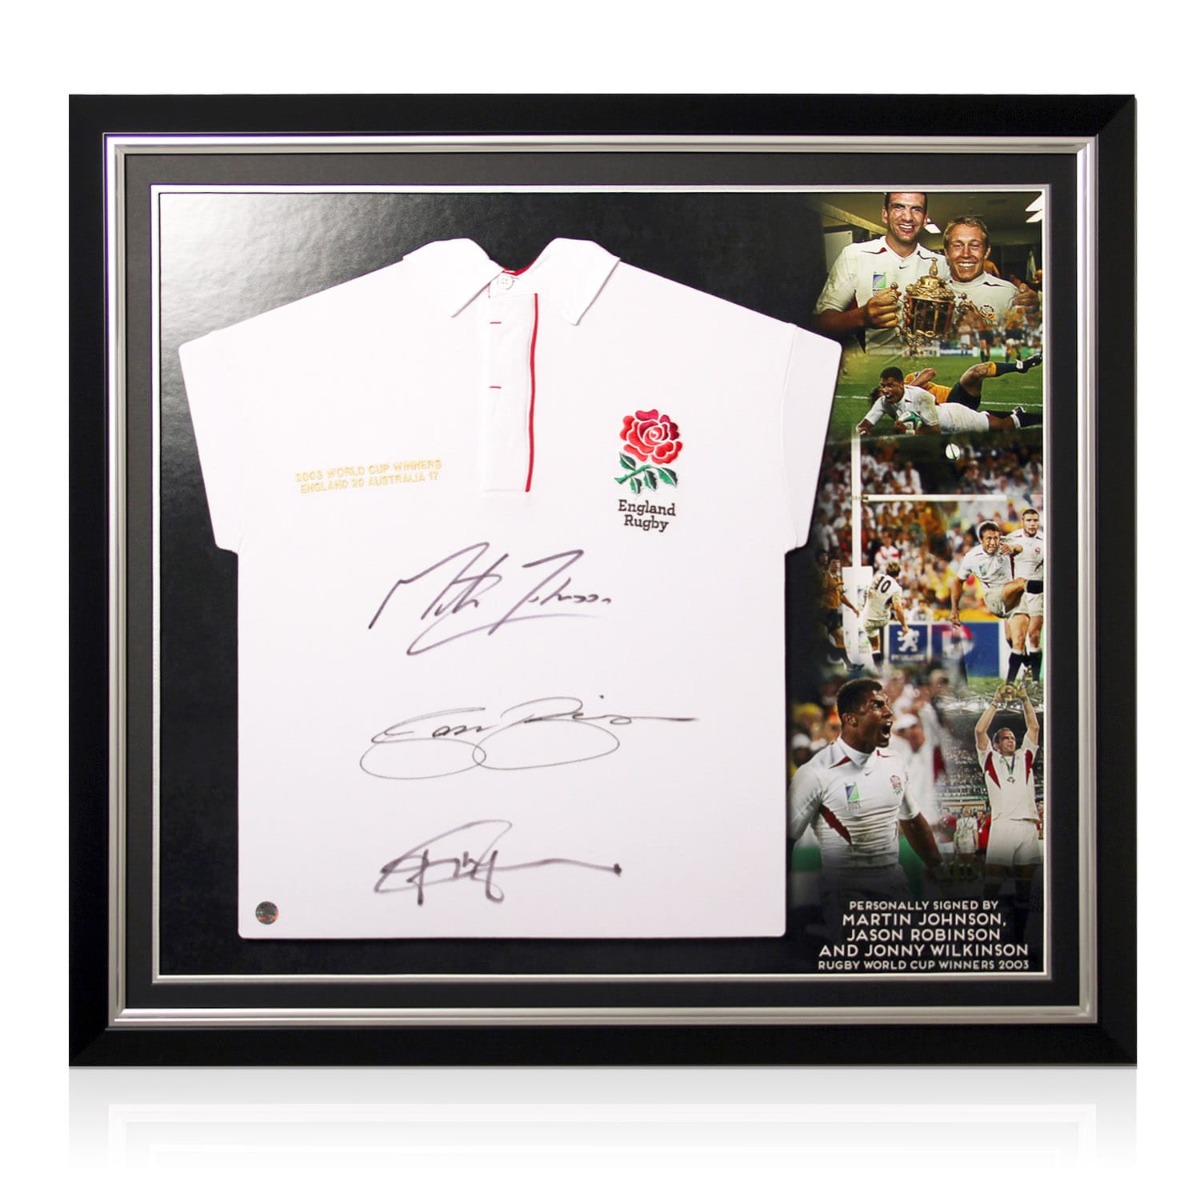 In Gift Box Exclusive Memorabilia Martin Johnson Signed England Rugby Photo Lifting The Webb Ellis Trophy